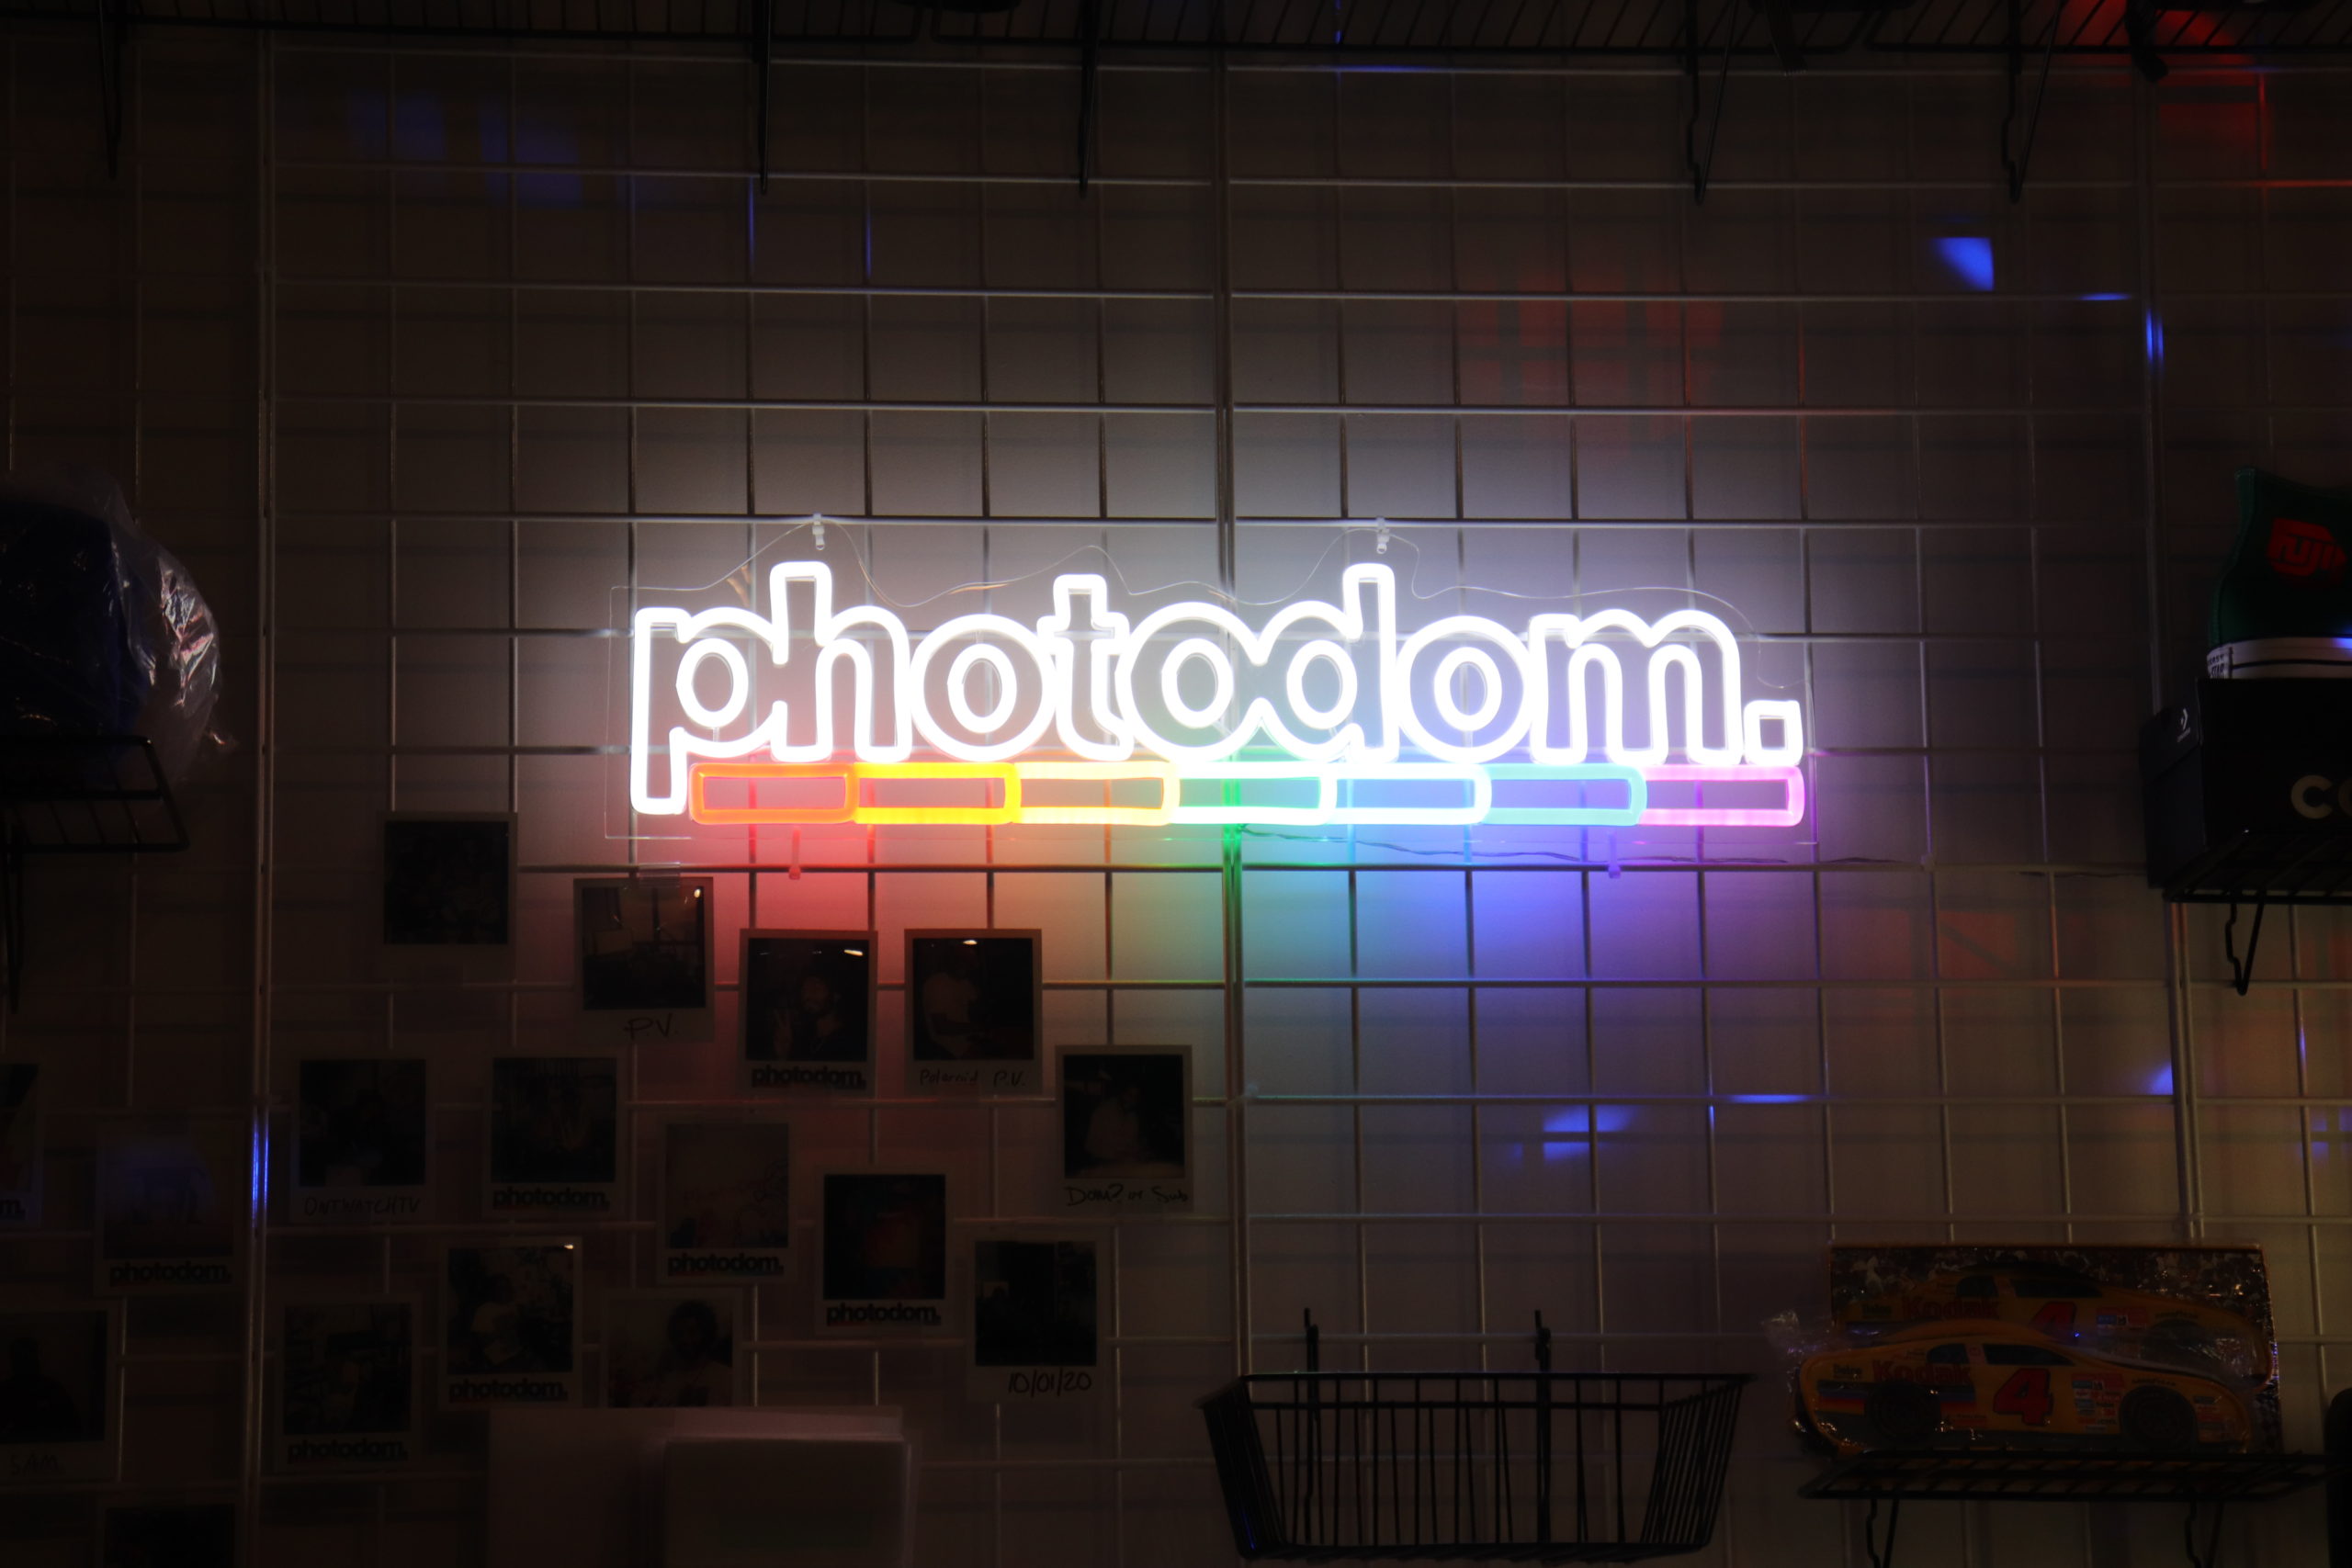 Photodom's neon sign glows in the dark.